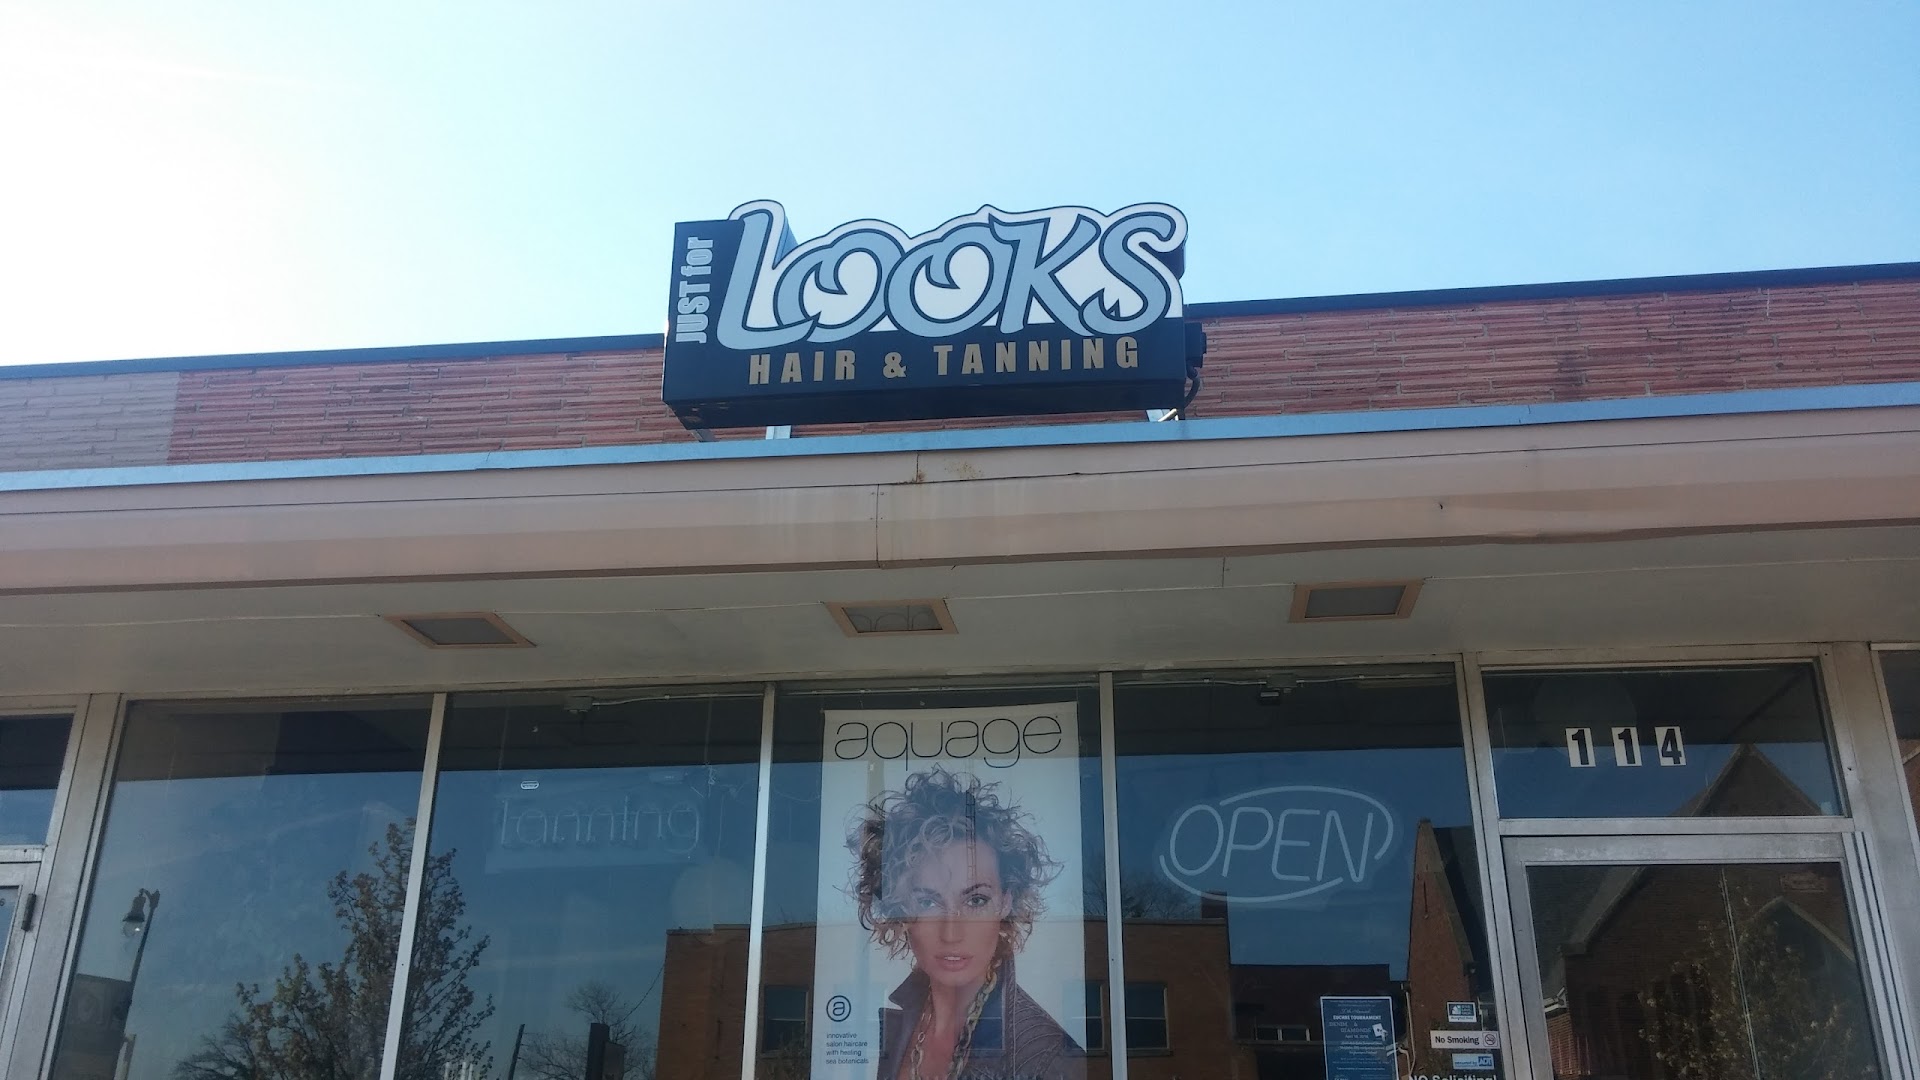 Just For Looks Hair & Tanning